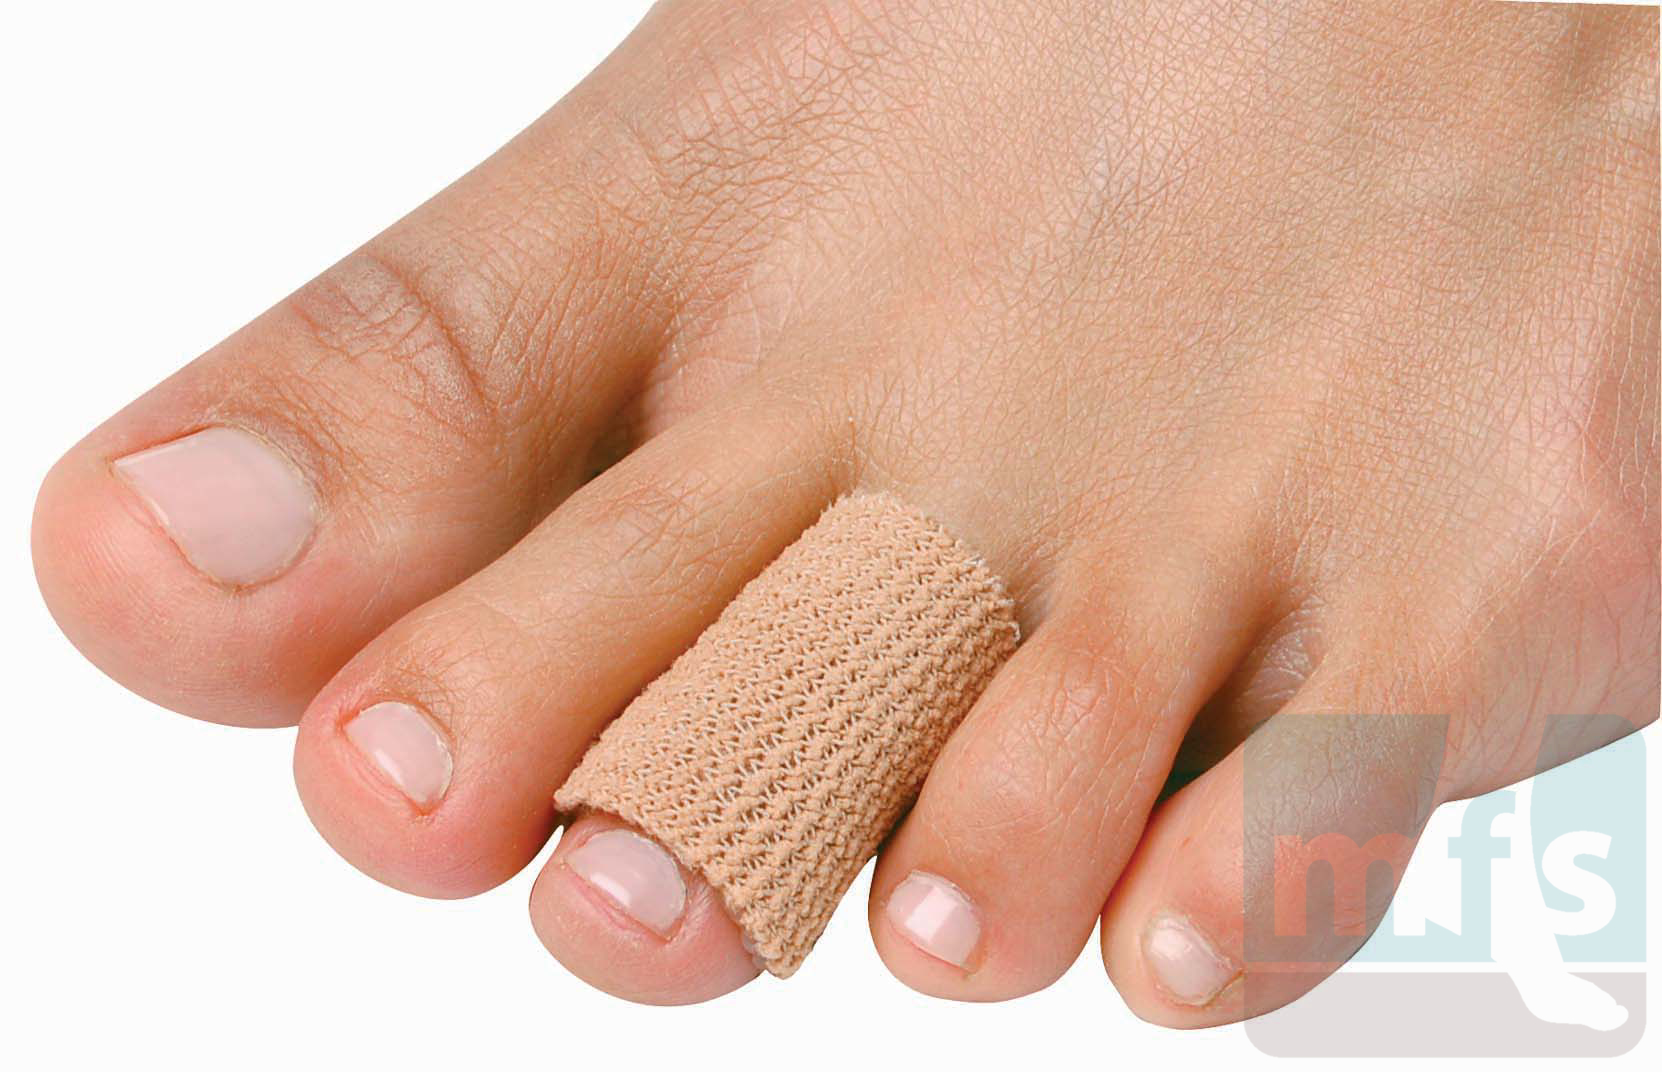 https://www.myfootshop.com/images/thumbs/w_1_0003972_fabric-covered-gel-toe-tubes.jpeg